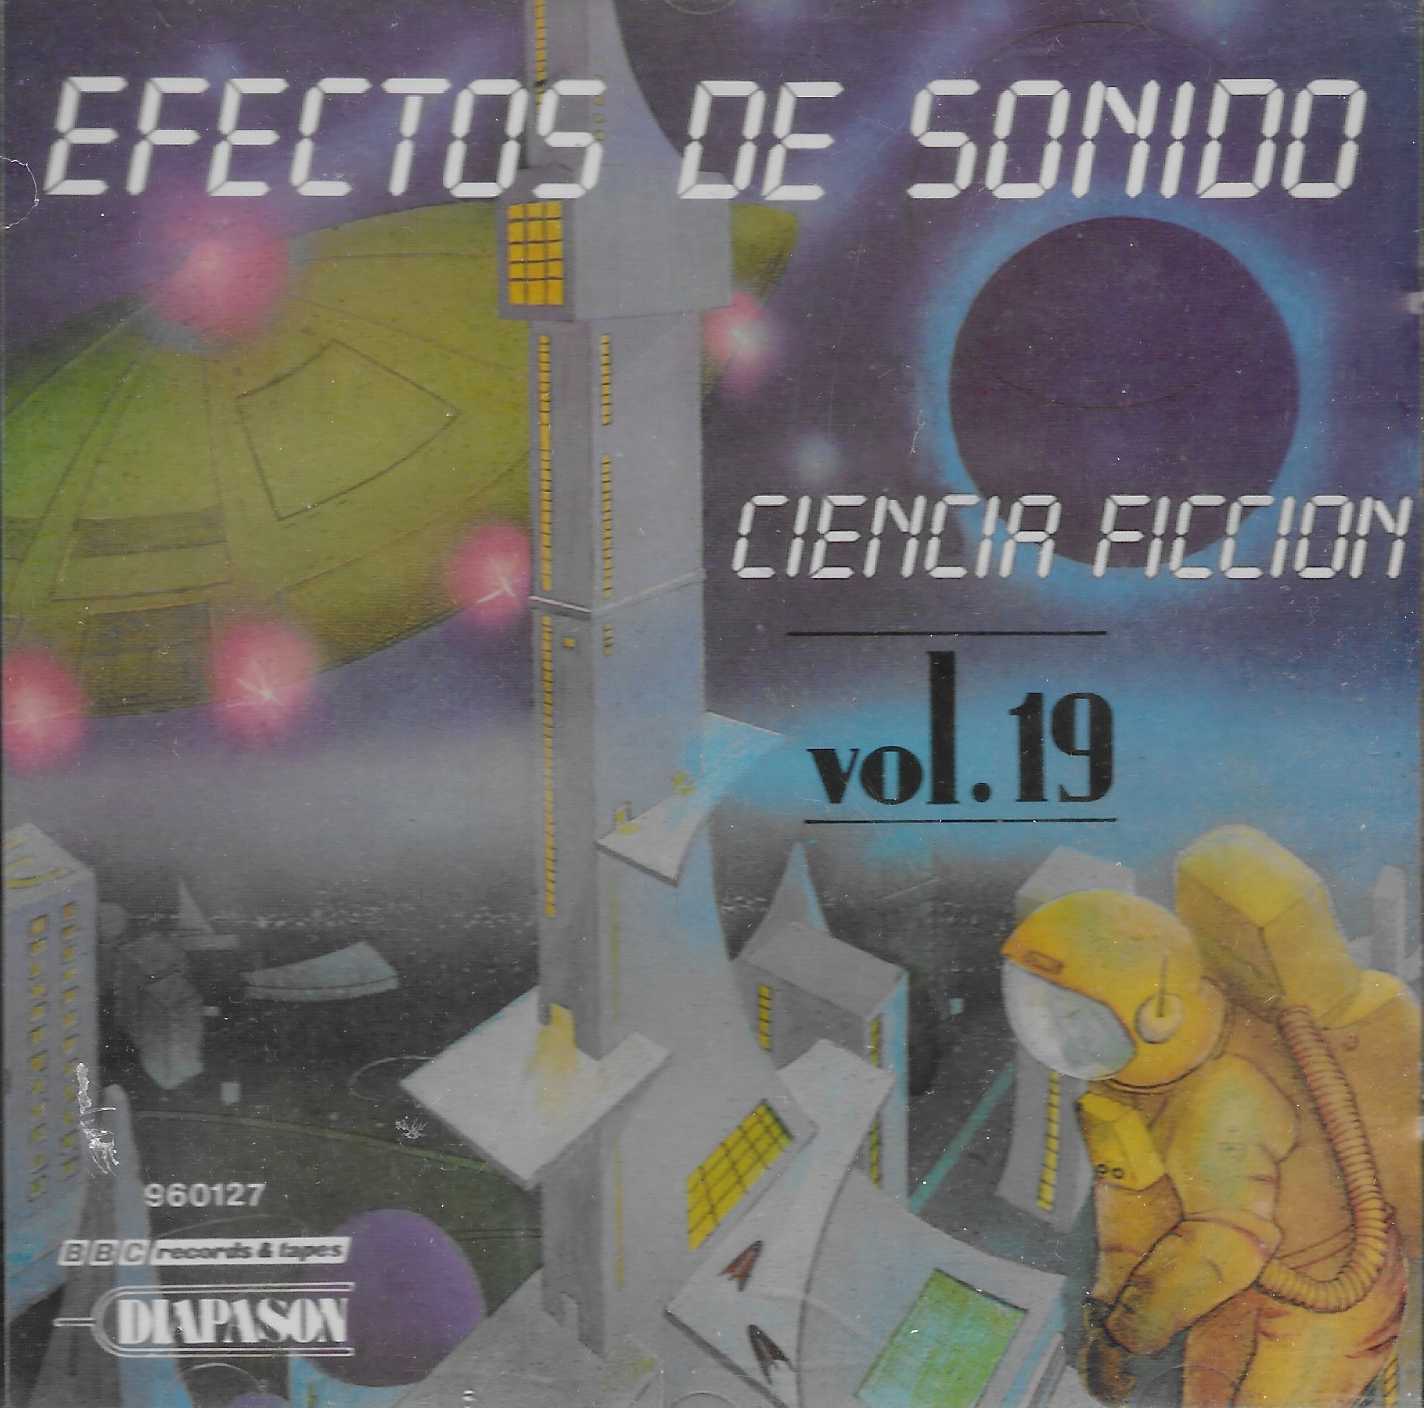 Picture of 95 0031 Effectos de sonido - Volume 19 by artist Various from the BBC cds - Records and Tapes library